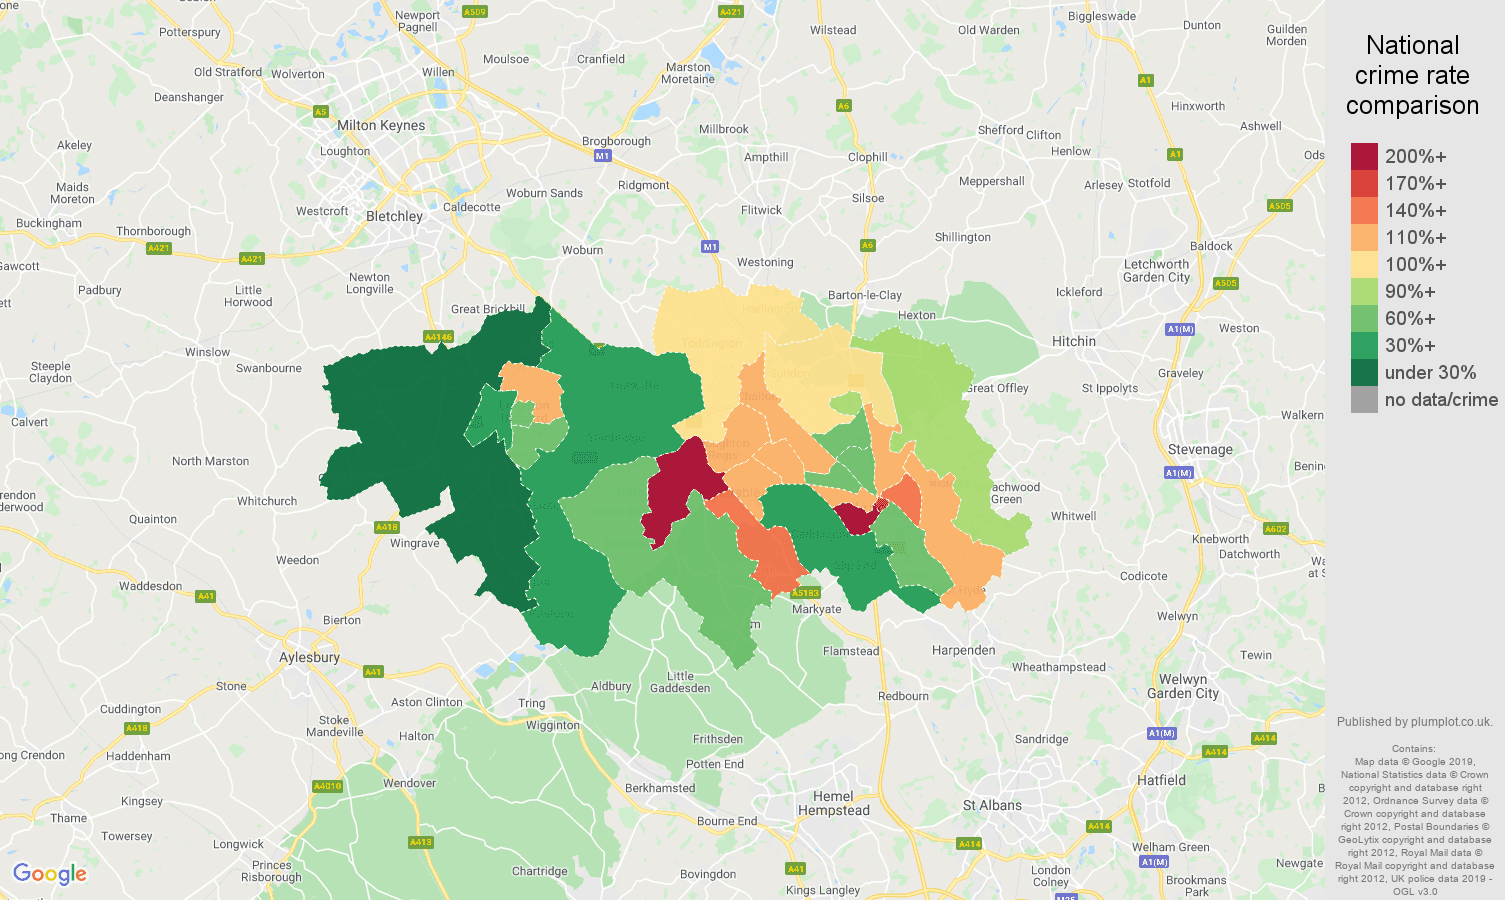 Luton other crime rate comparison map